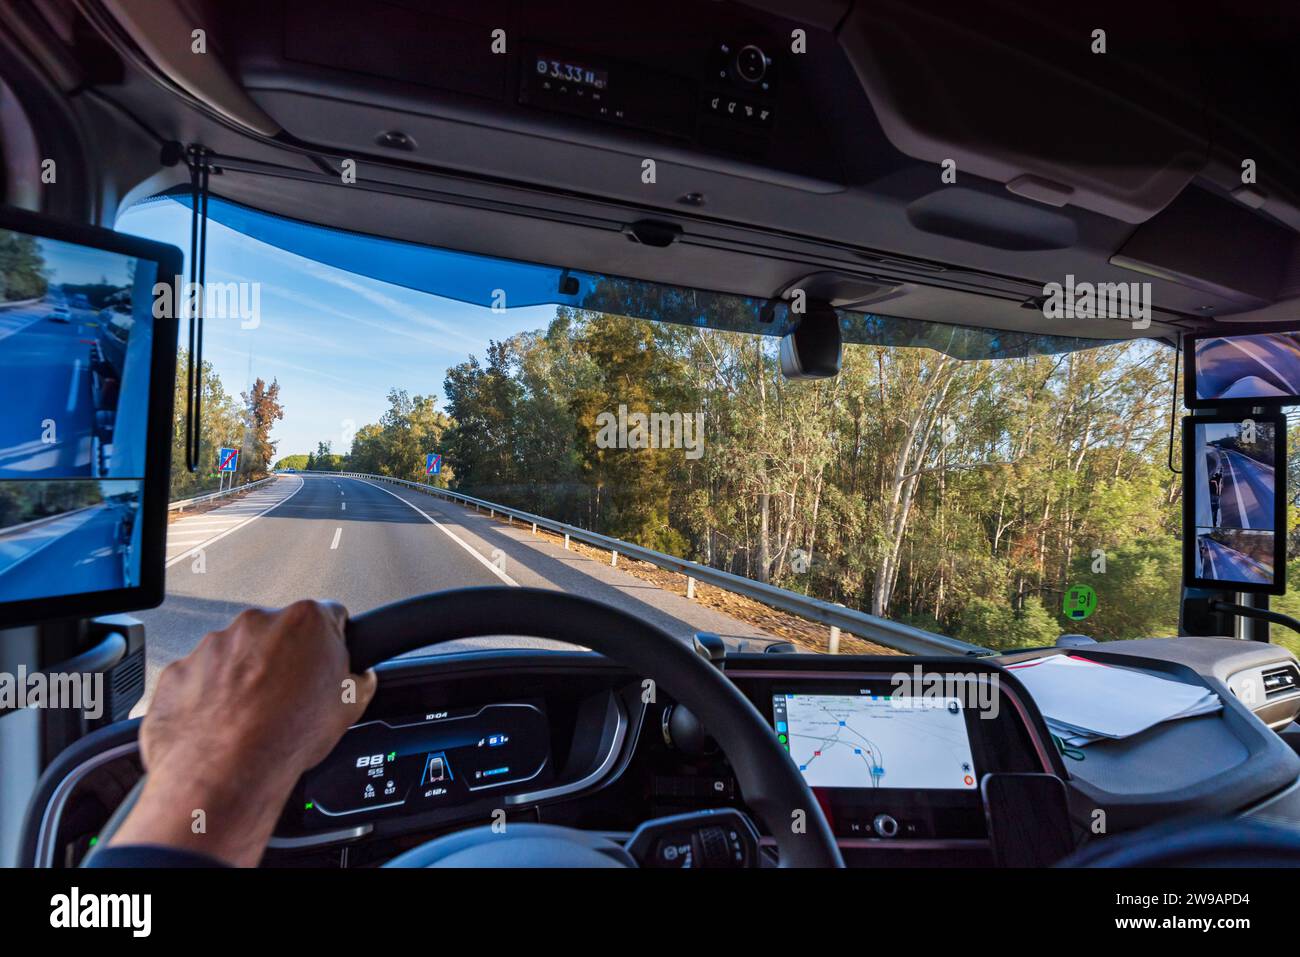 View from the driver's position of a truck on the road of the interior of the cabin with the screens as rearview mirrors. Stock Photo